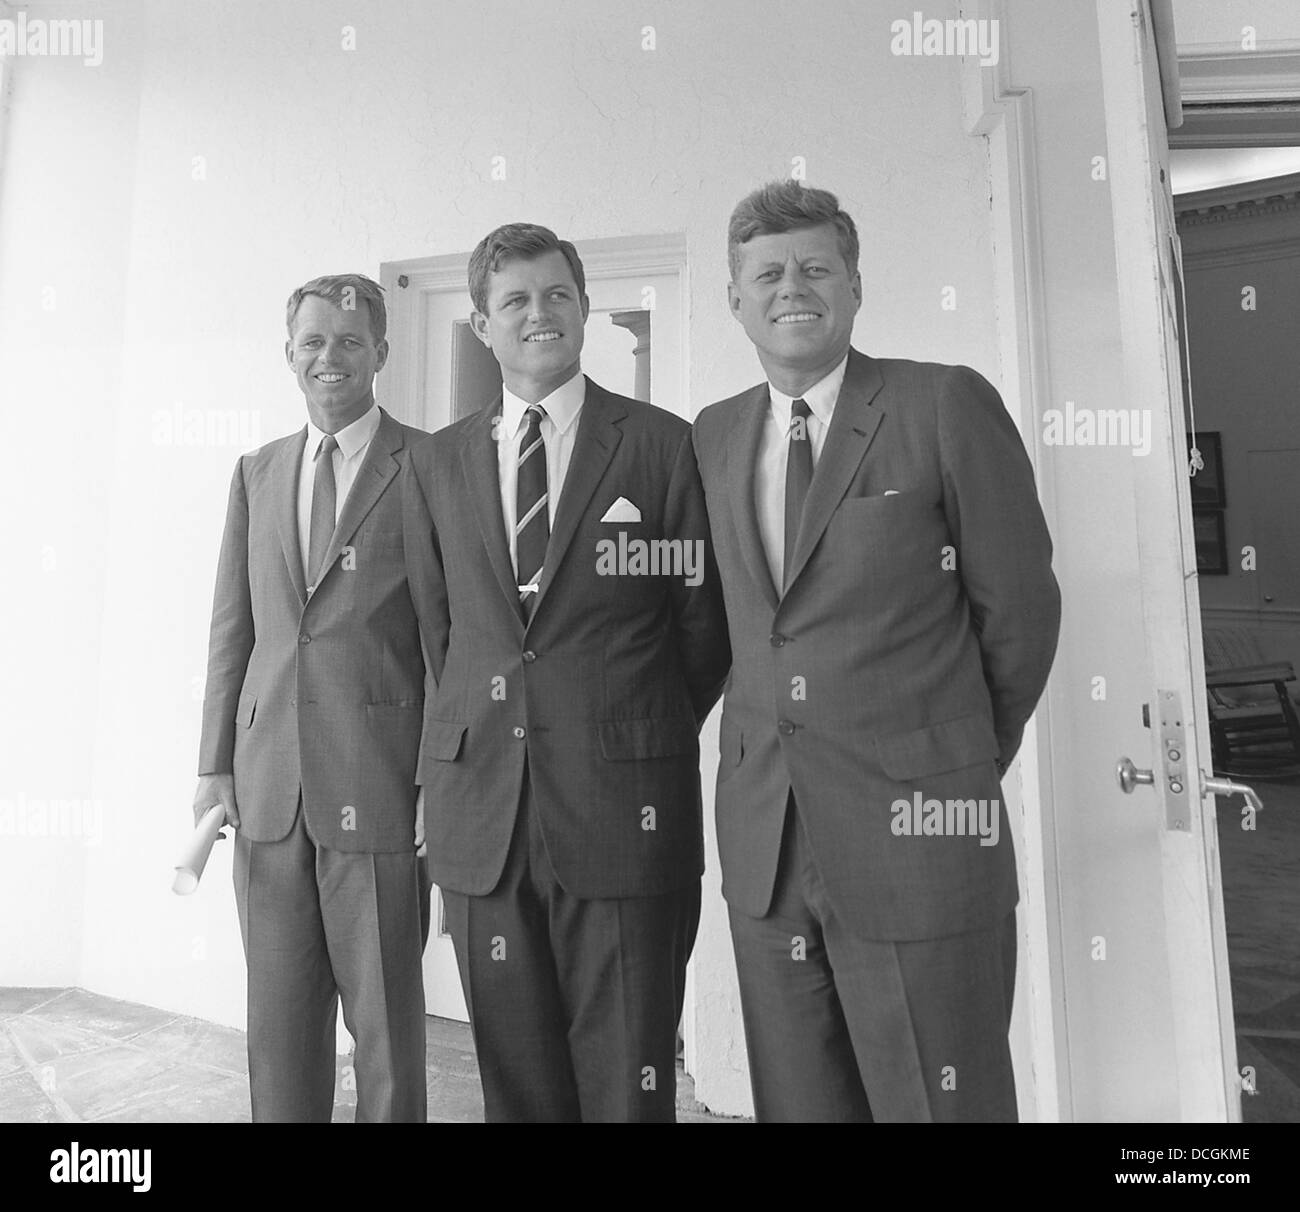 Digitally restored vintage photo of President John Kennedy with his brothers Robert and Ted Kennedy. Stock Photo